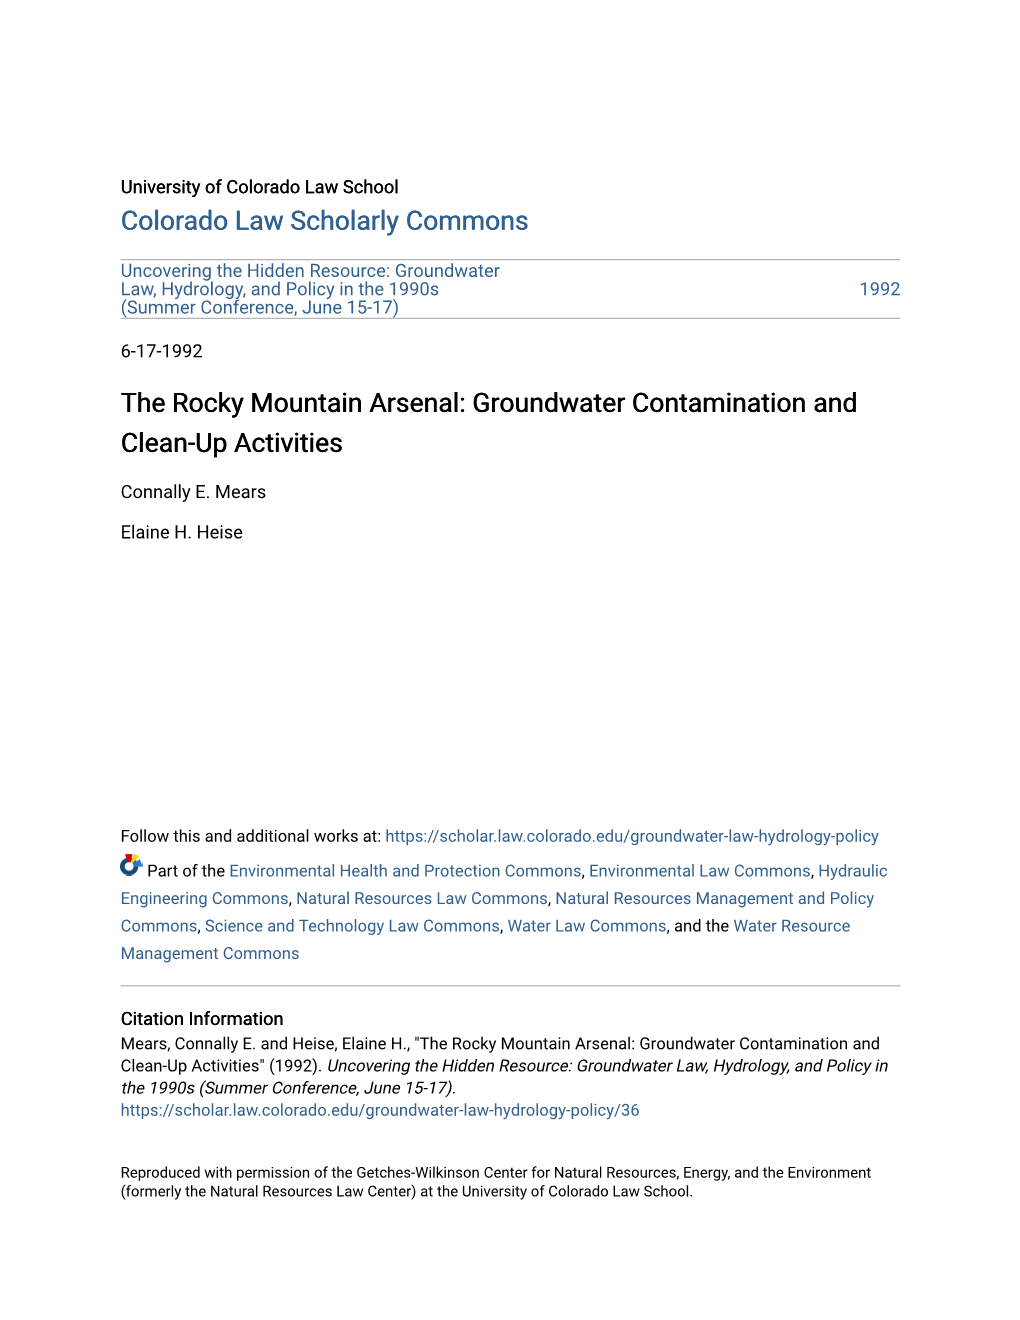 Groundwater Contamination and Clean-Up Activities